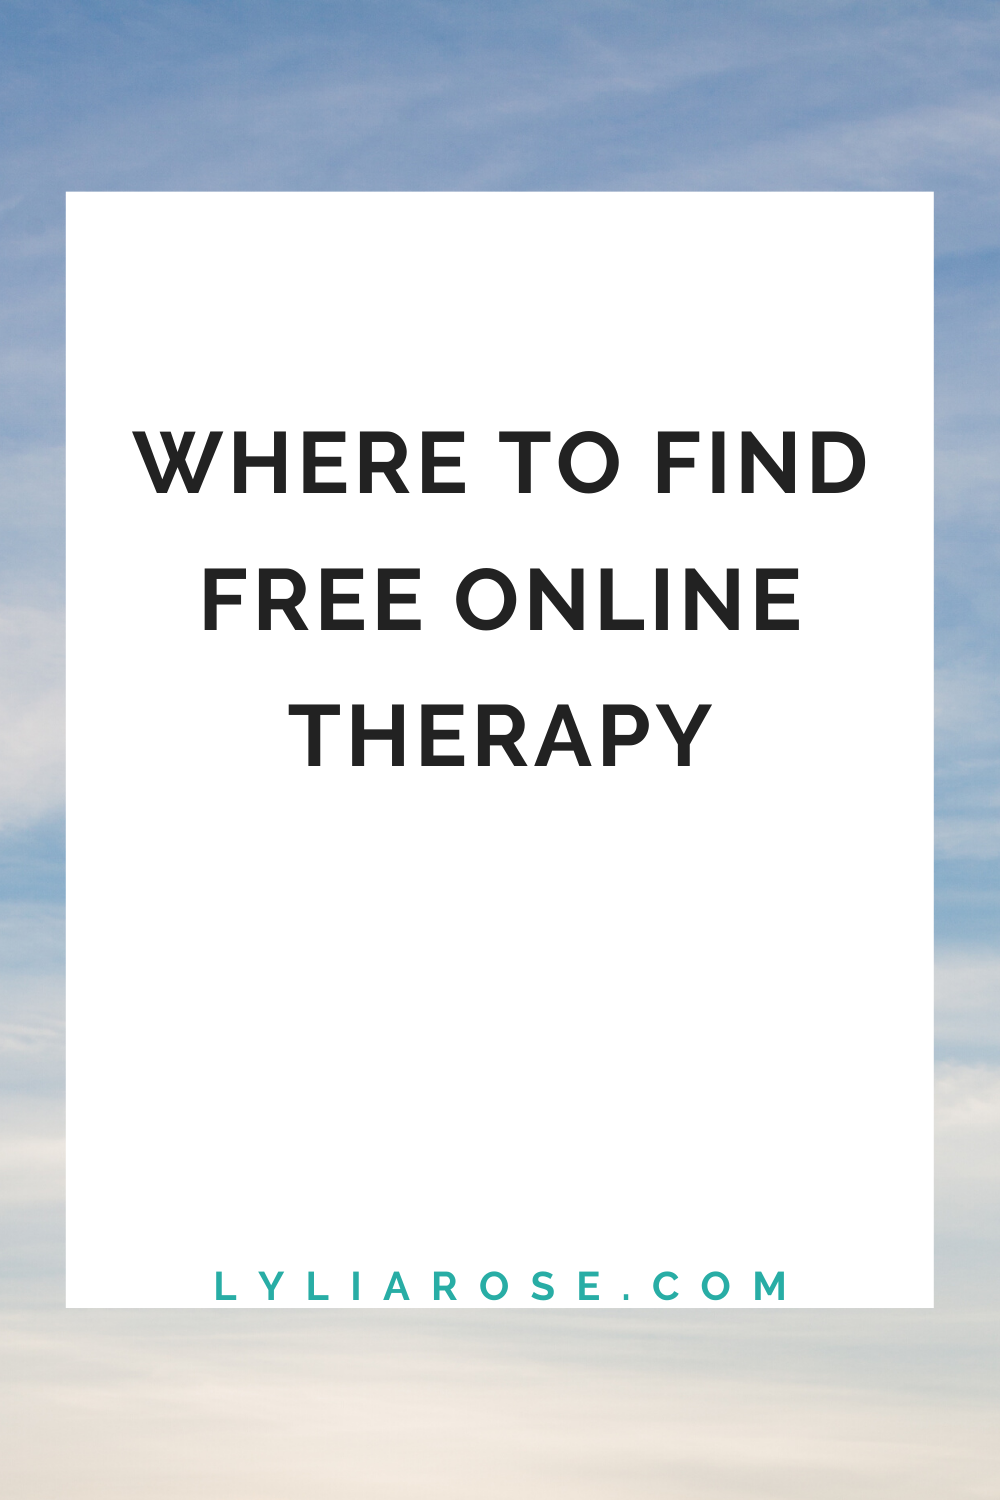 Where to find free online therapy (1)